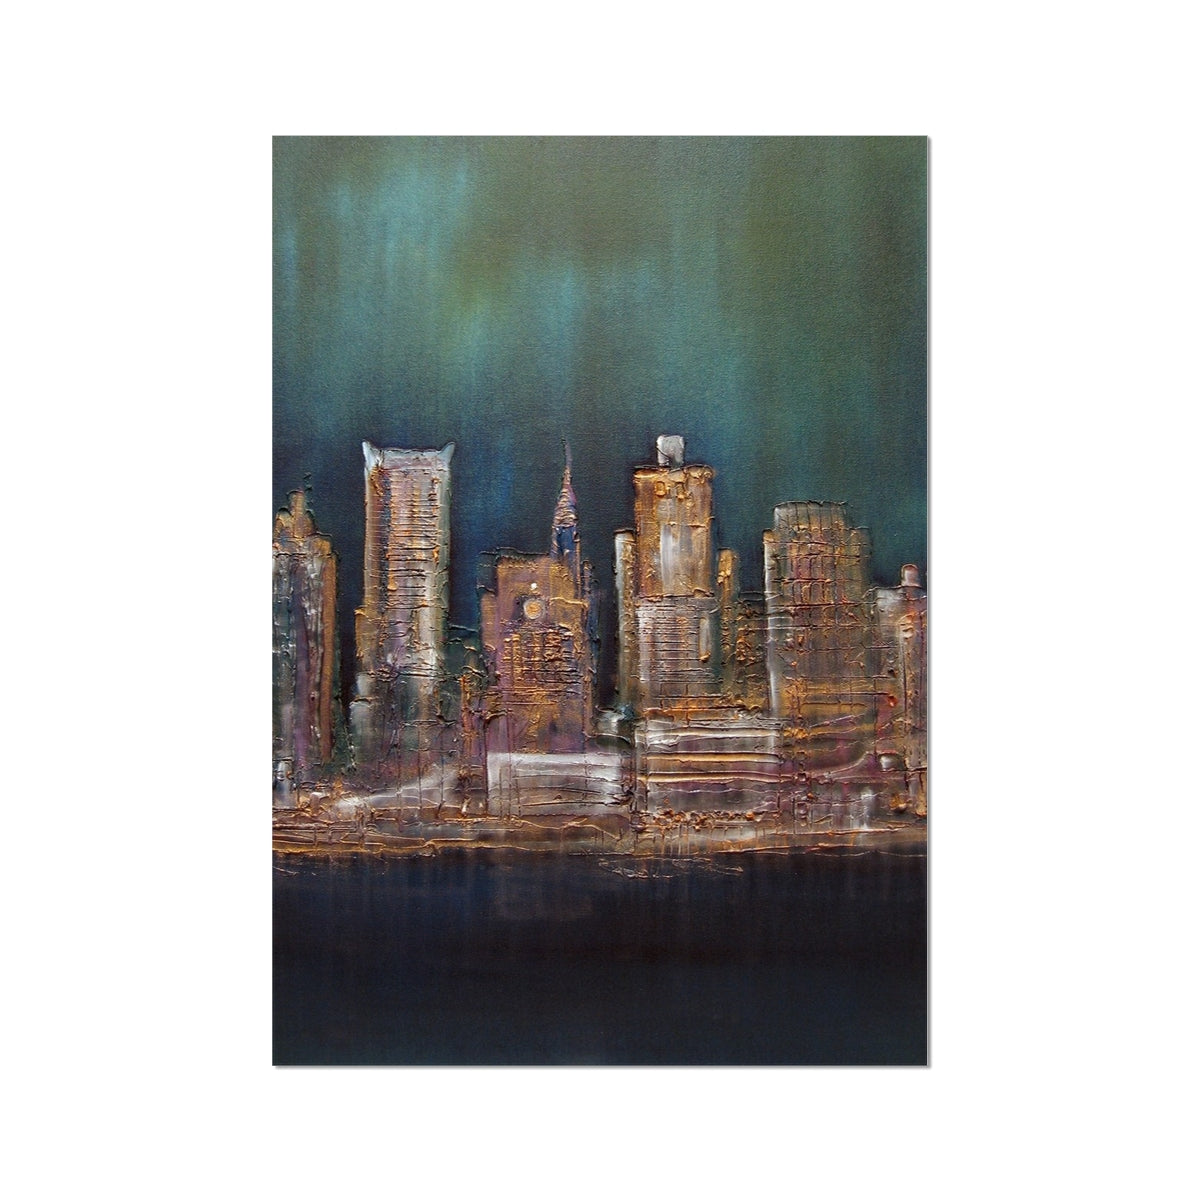 New York West Side Painting | Fine Art Prints From Scotland-Unframed Prints-World Art Gallery-A2 Portrait-Paintings, Prints, Homeware, Art Gifts From Scotland By Scottish Artist Kevin Hunter